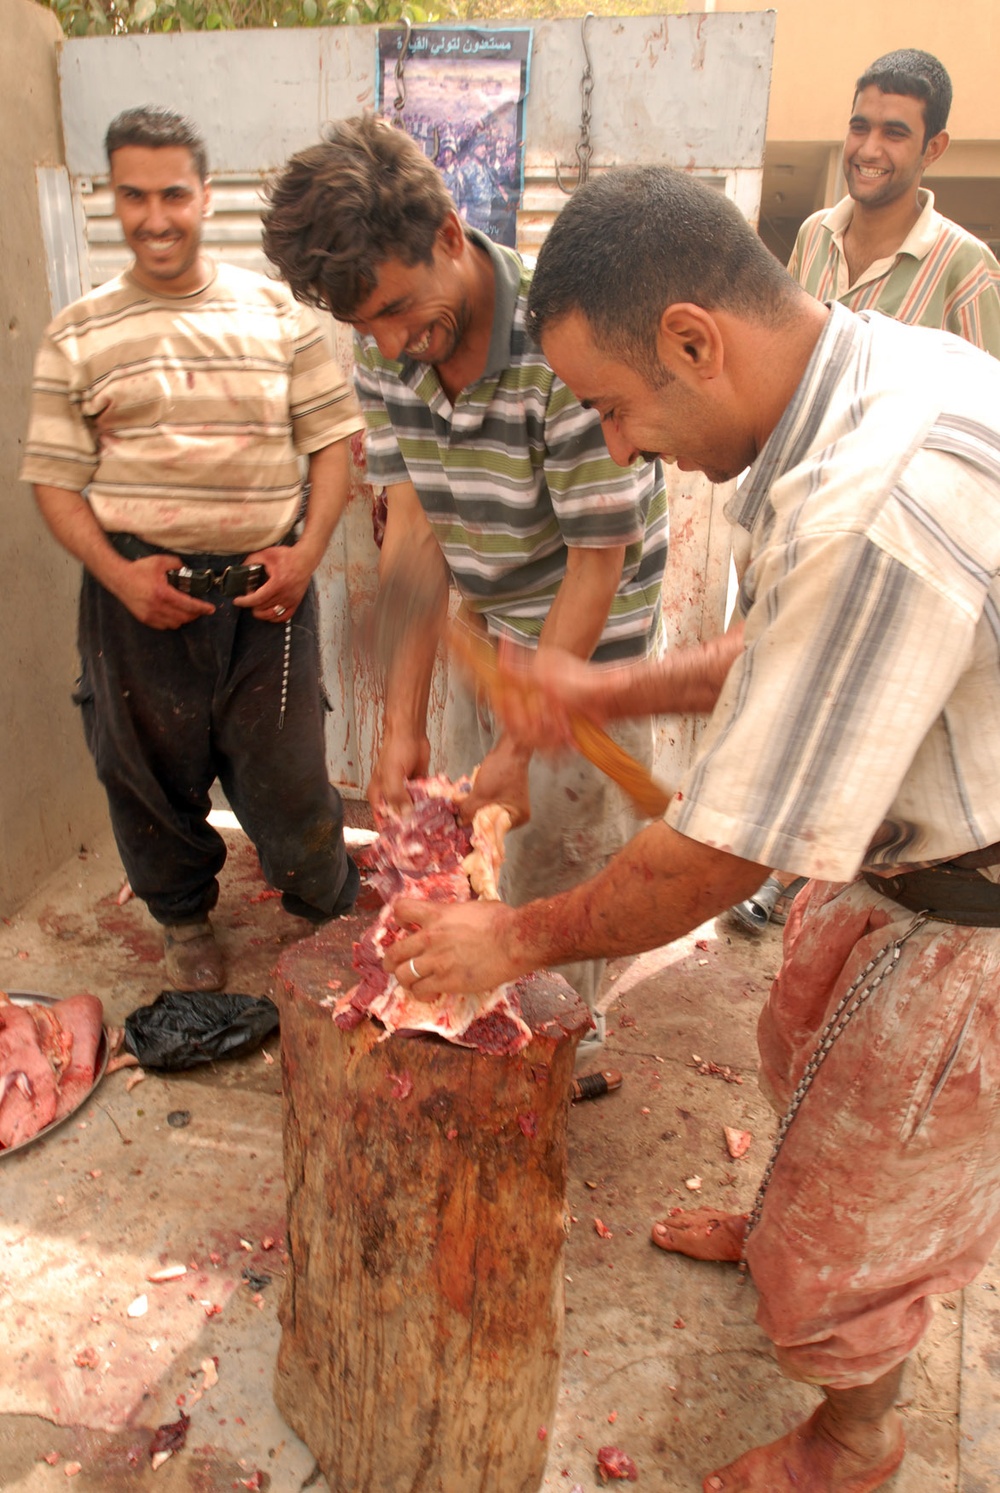 Prominent community leader provides fresh beef to poor Iraqi families for Eid al Fitr